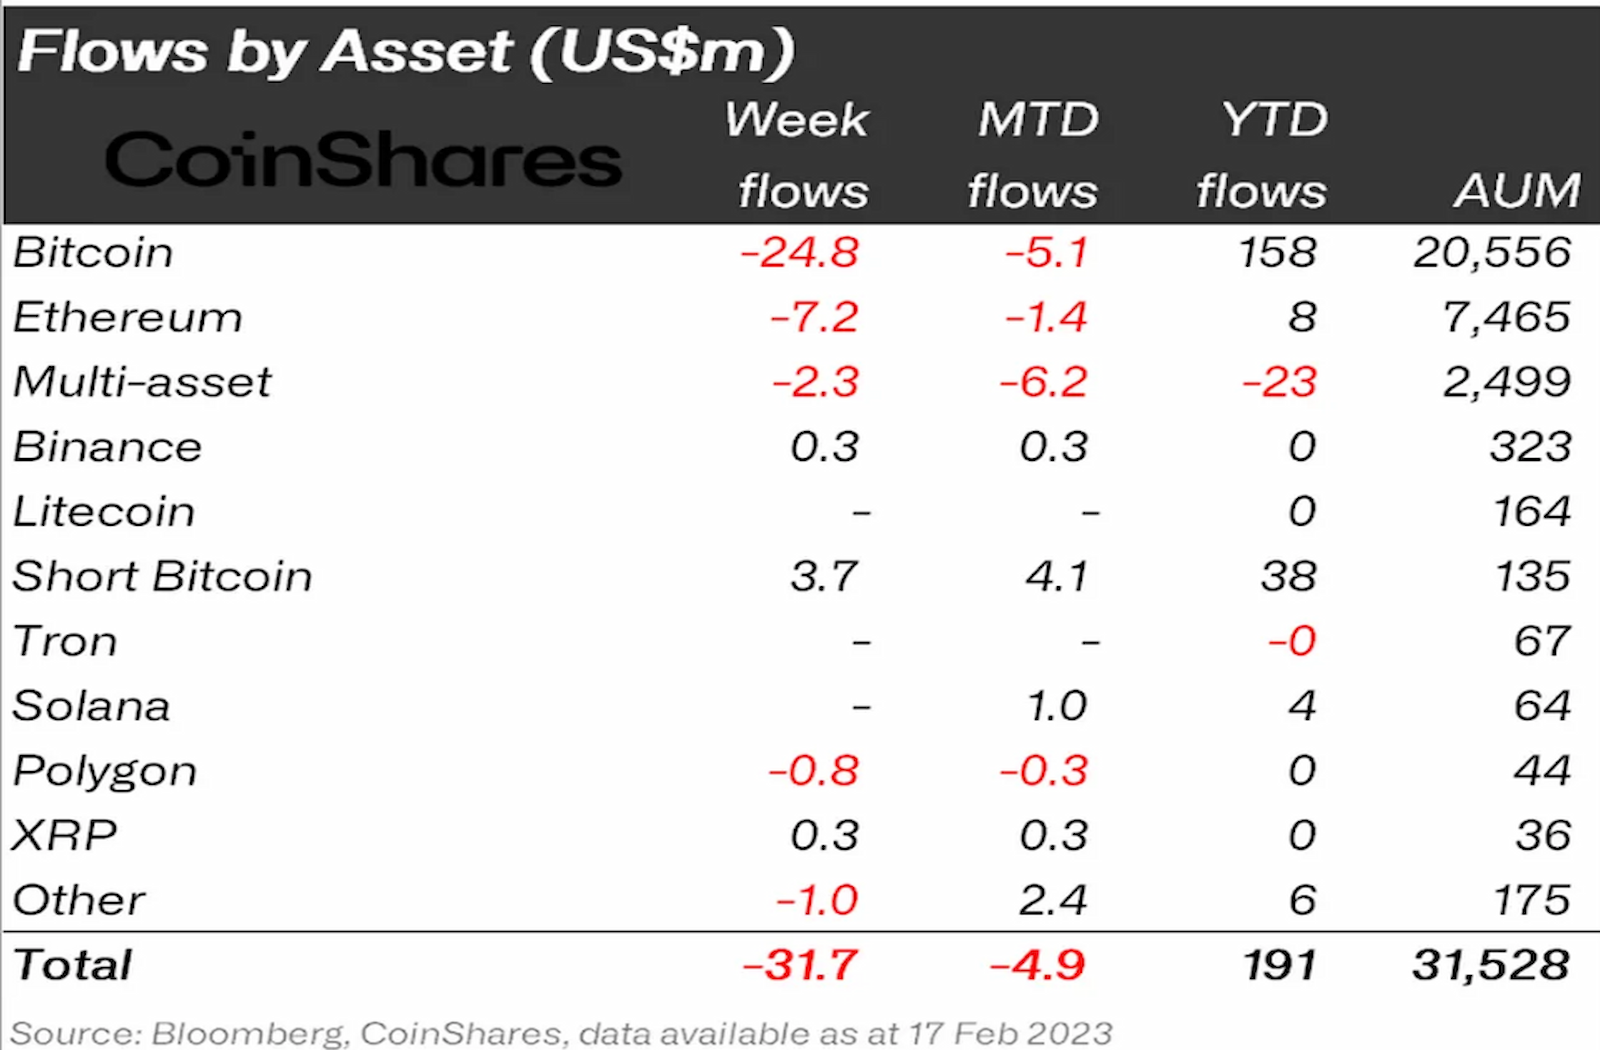 Digital assets investment products fund flow, with BTC leading the weekly outflows.